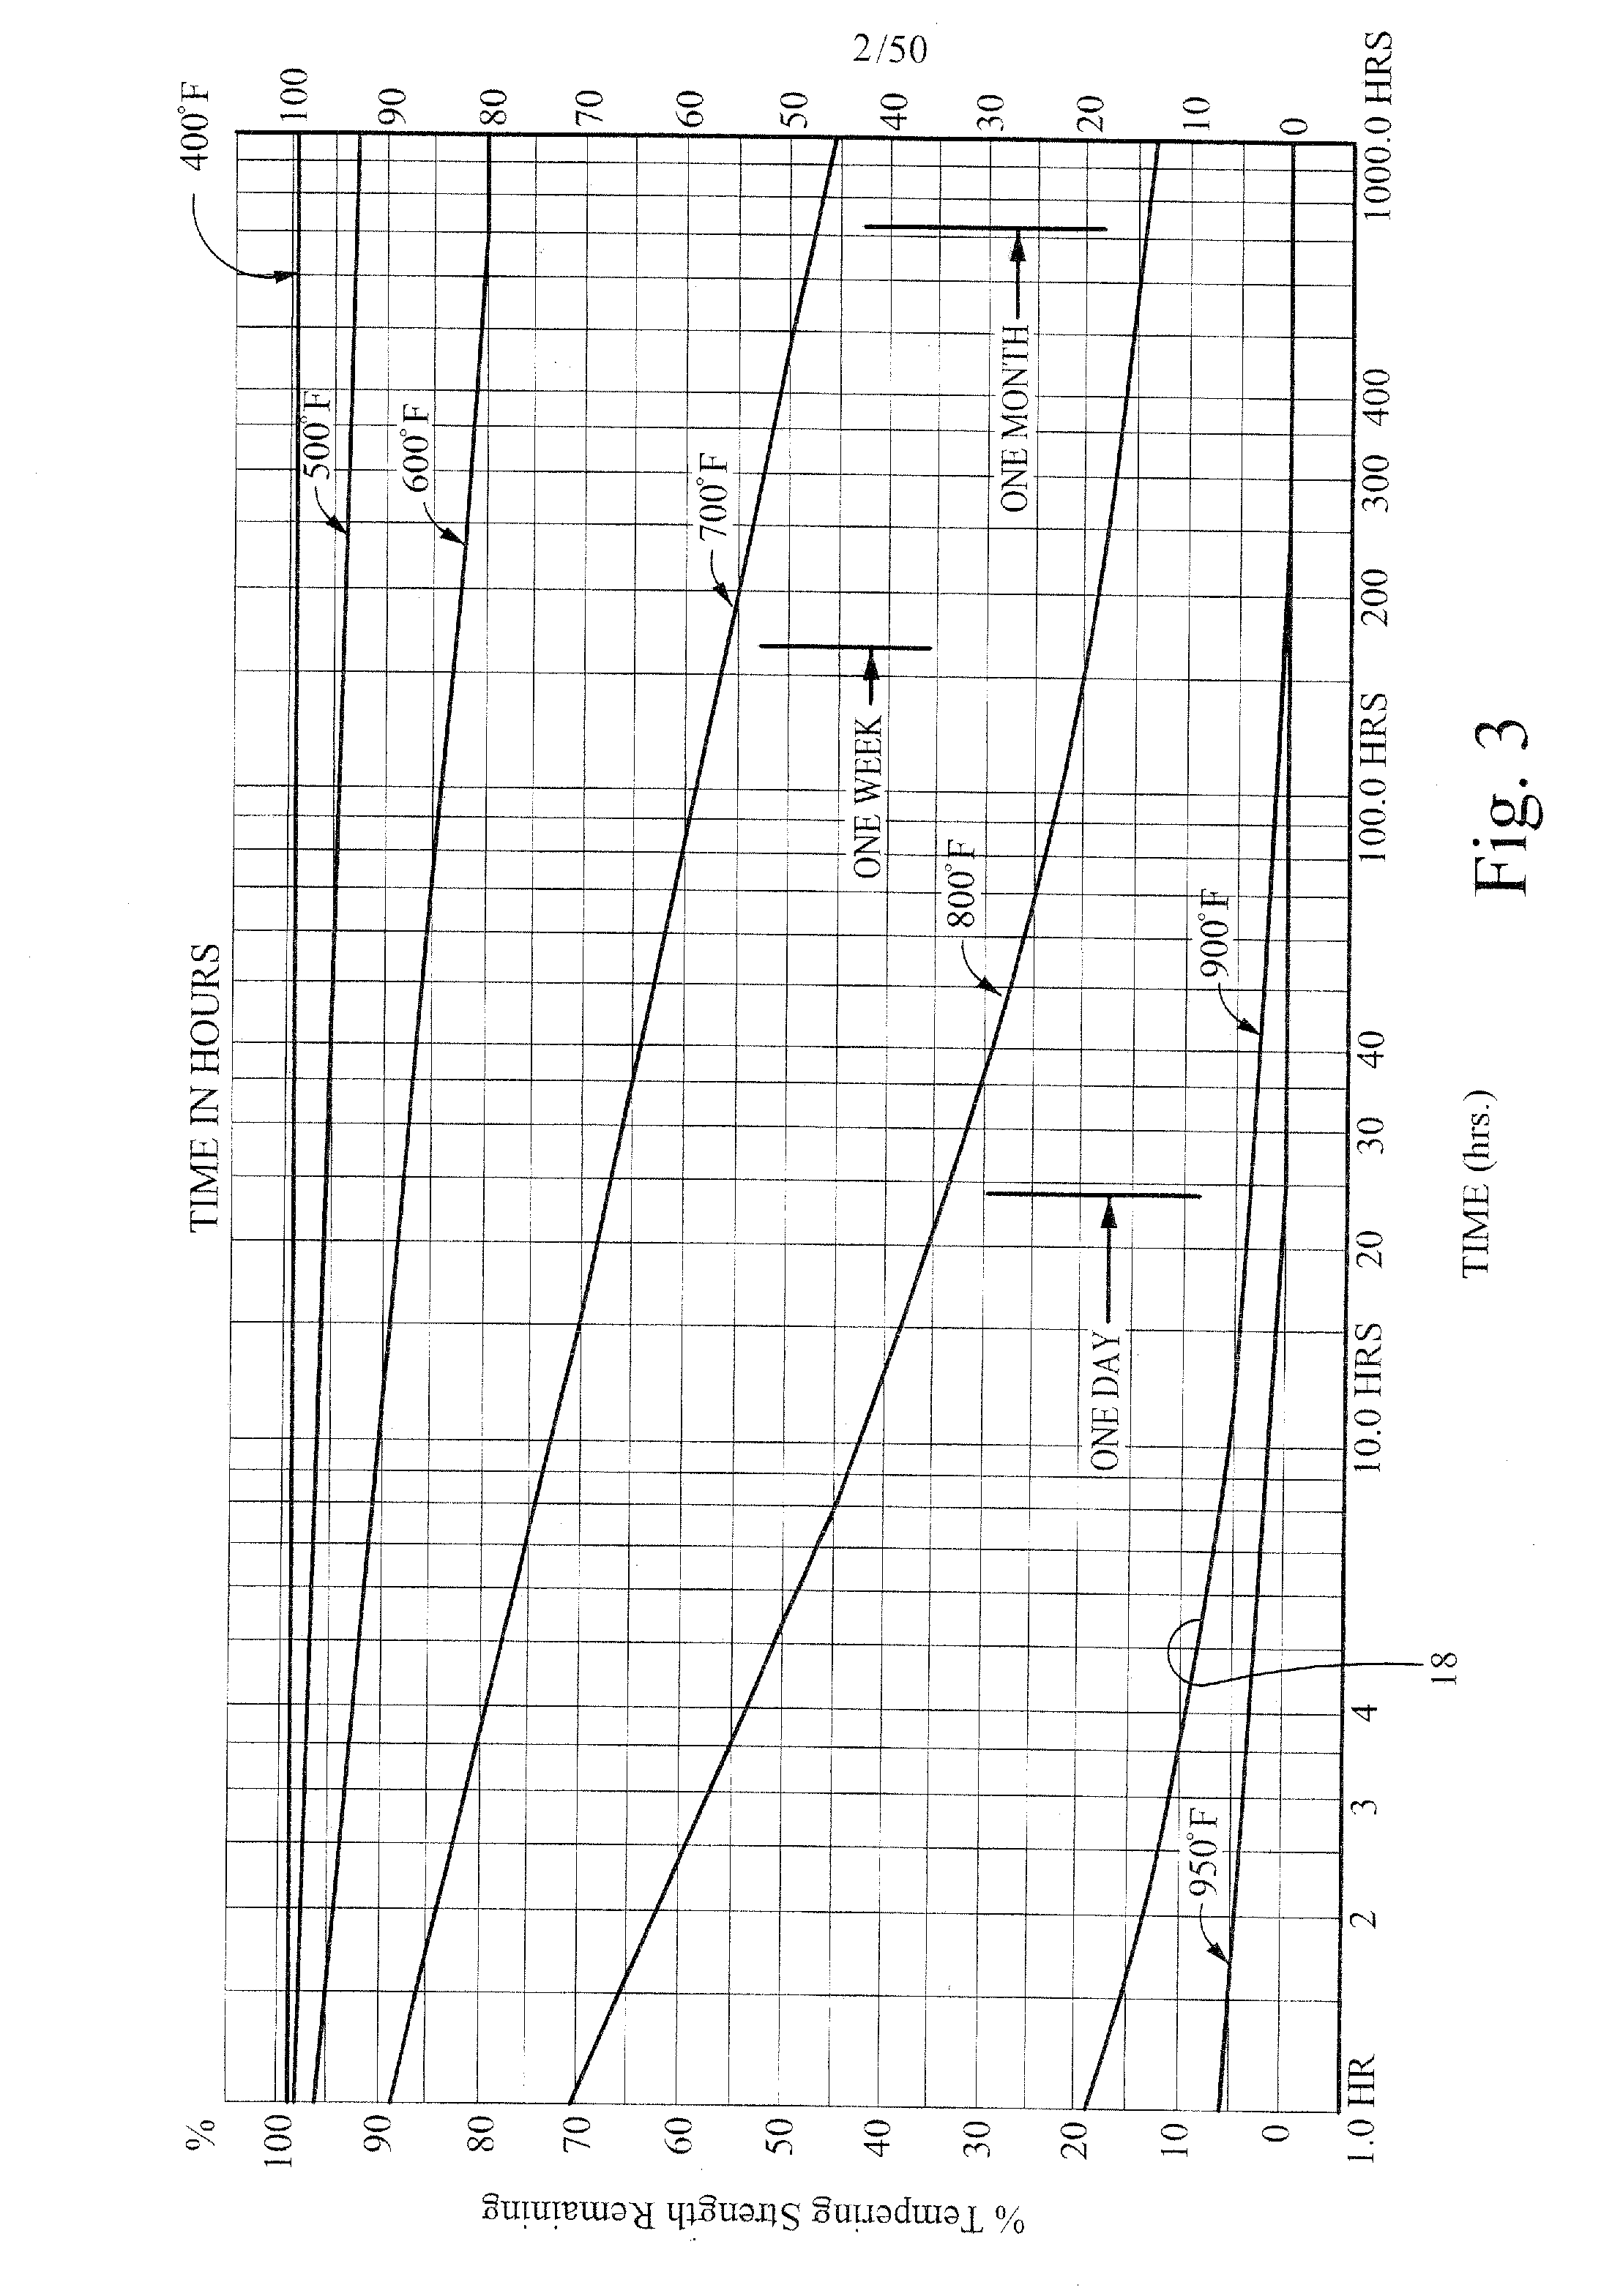 Coefficient of thermal expansion filler for vanadium-based frit materials and/or methods of making and/or using the same